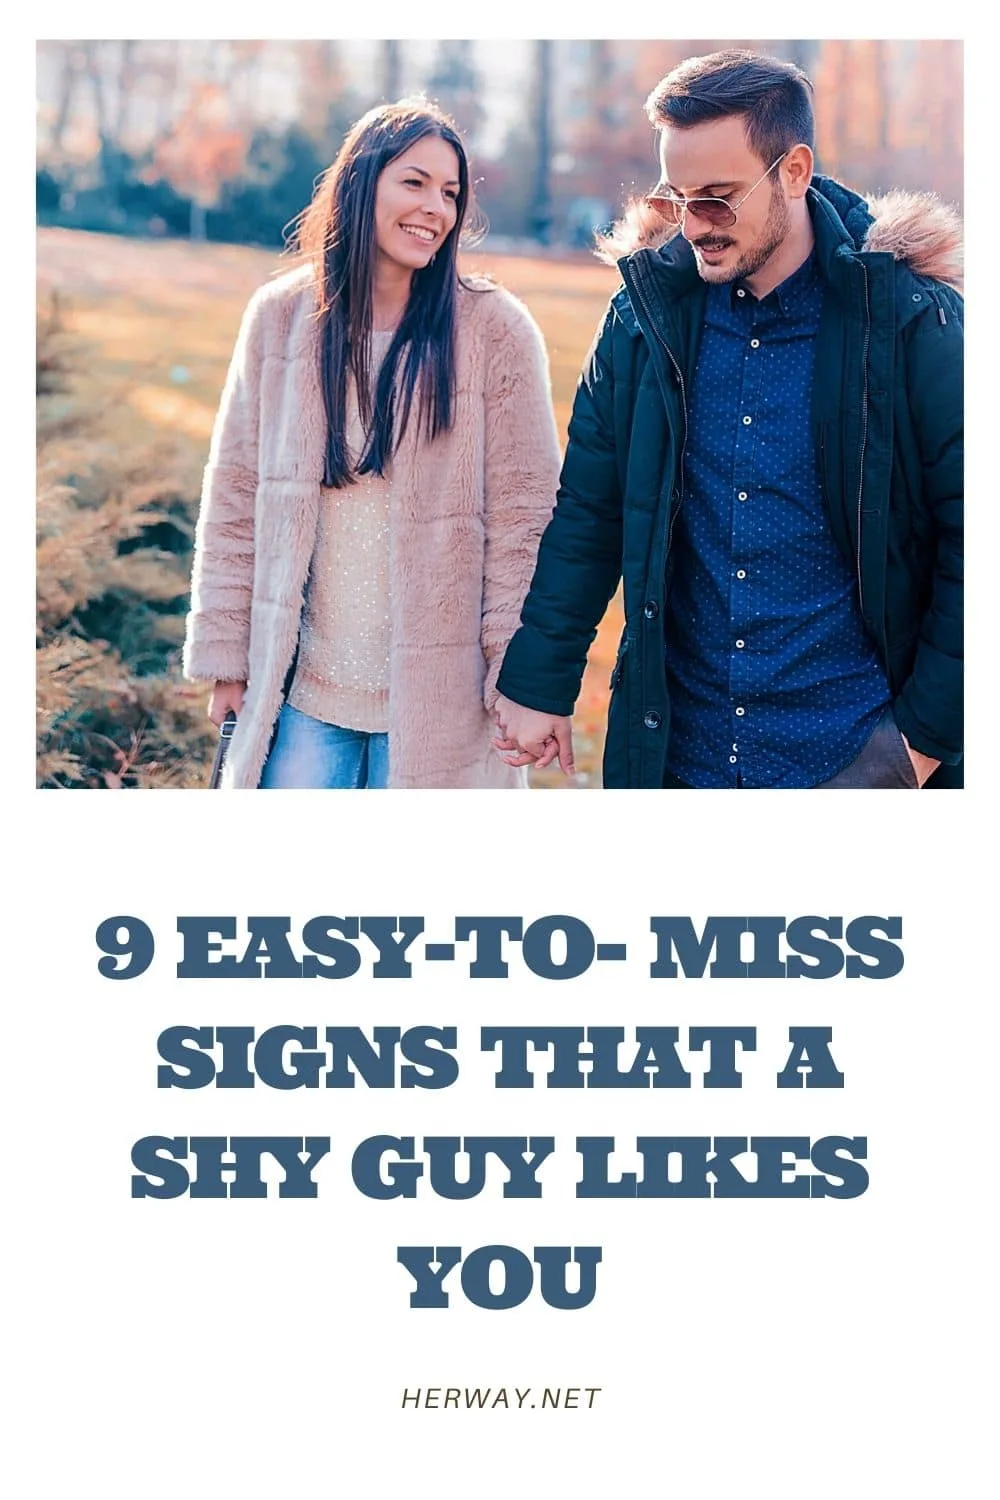 9 Easy-to- Miss Signs That A Shy Guy Likes You